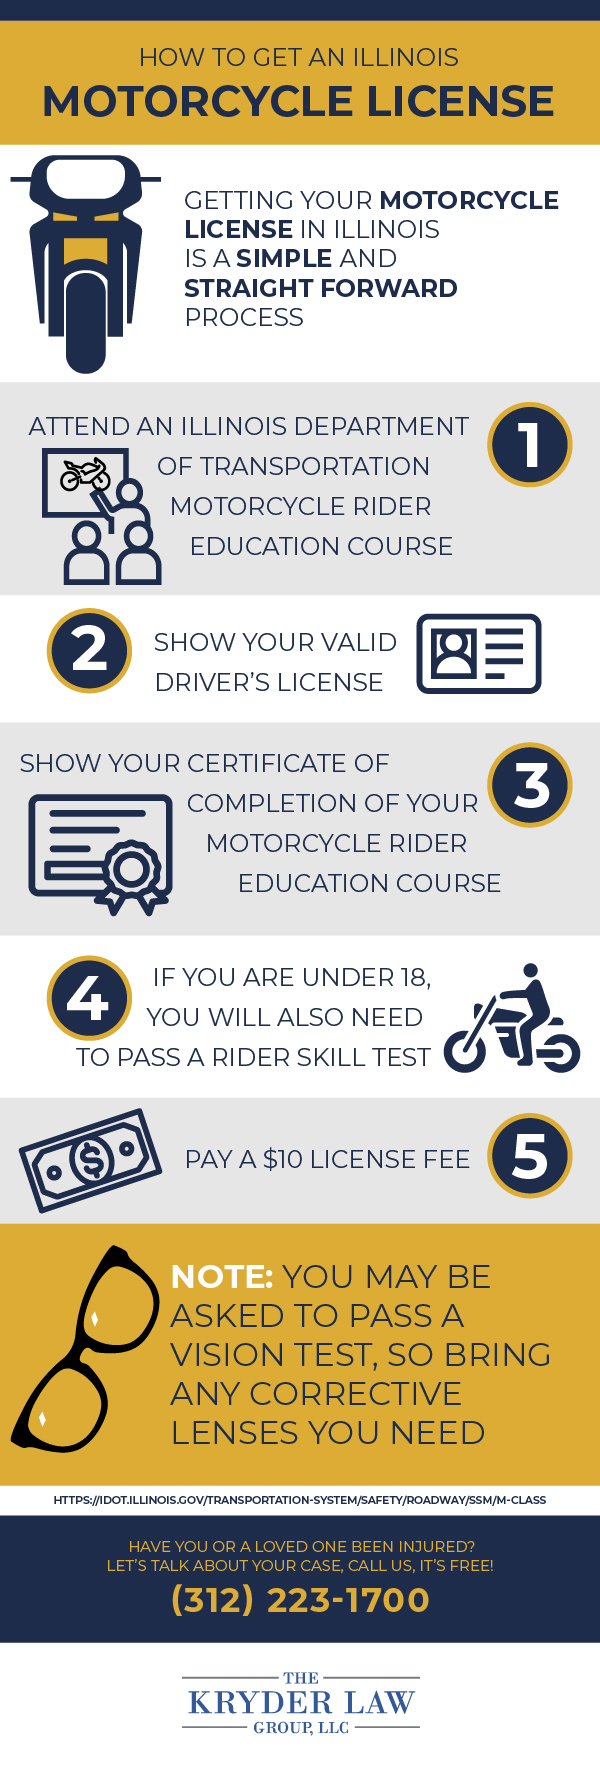 How to Get A Motorcycle License in Illinois | The Kryder Law Group, LLC